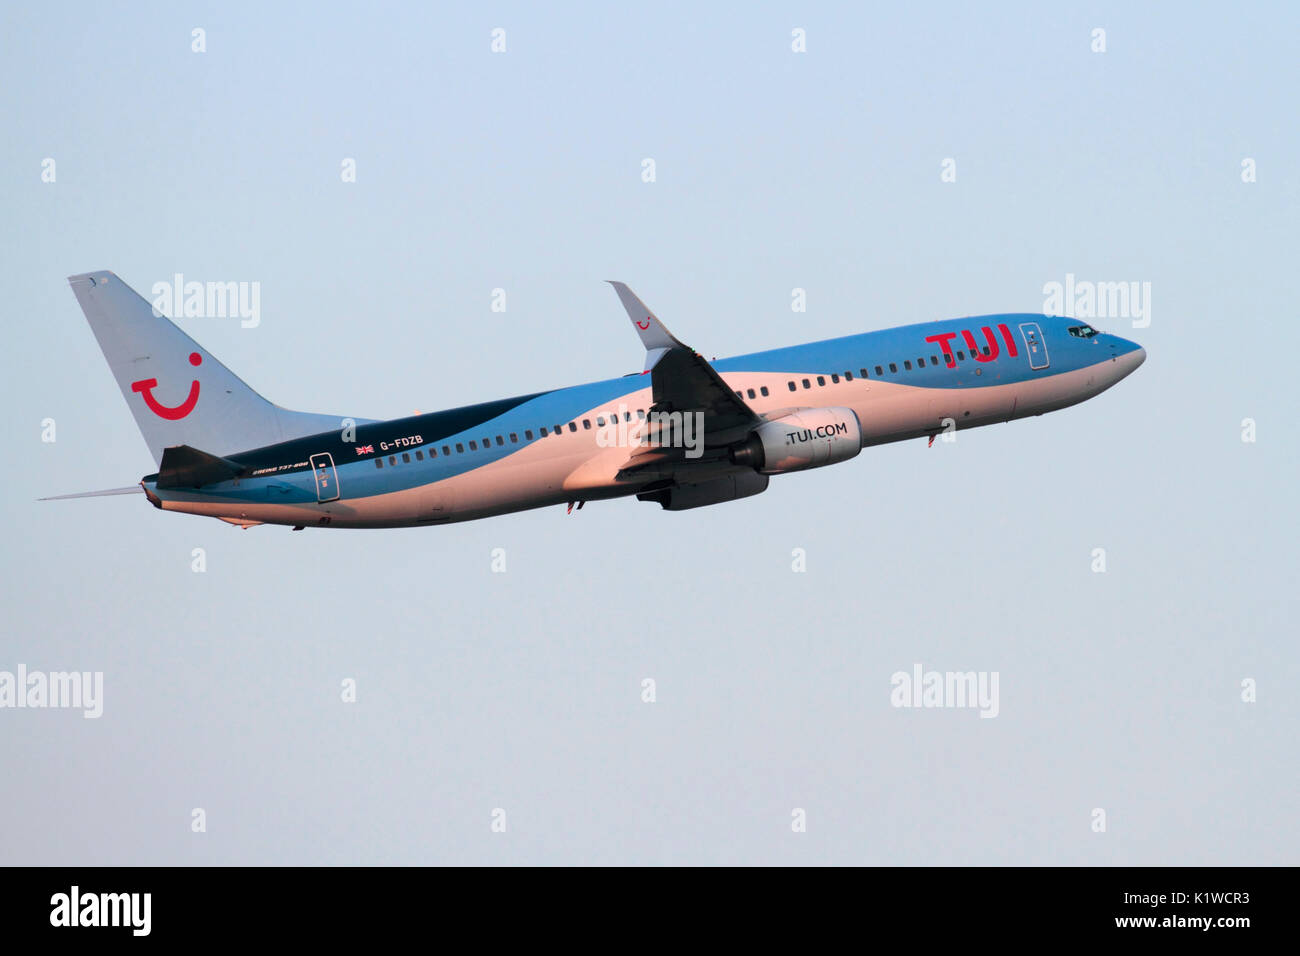 Commercial air travel. TUI Airlines UK (formerly Thomson Airways) Boeing 737-800 jet airliner flying in the sky on departure at sunset Stock Photo